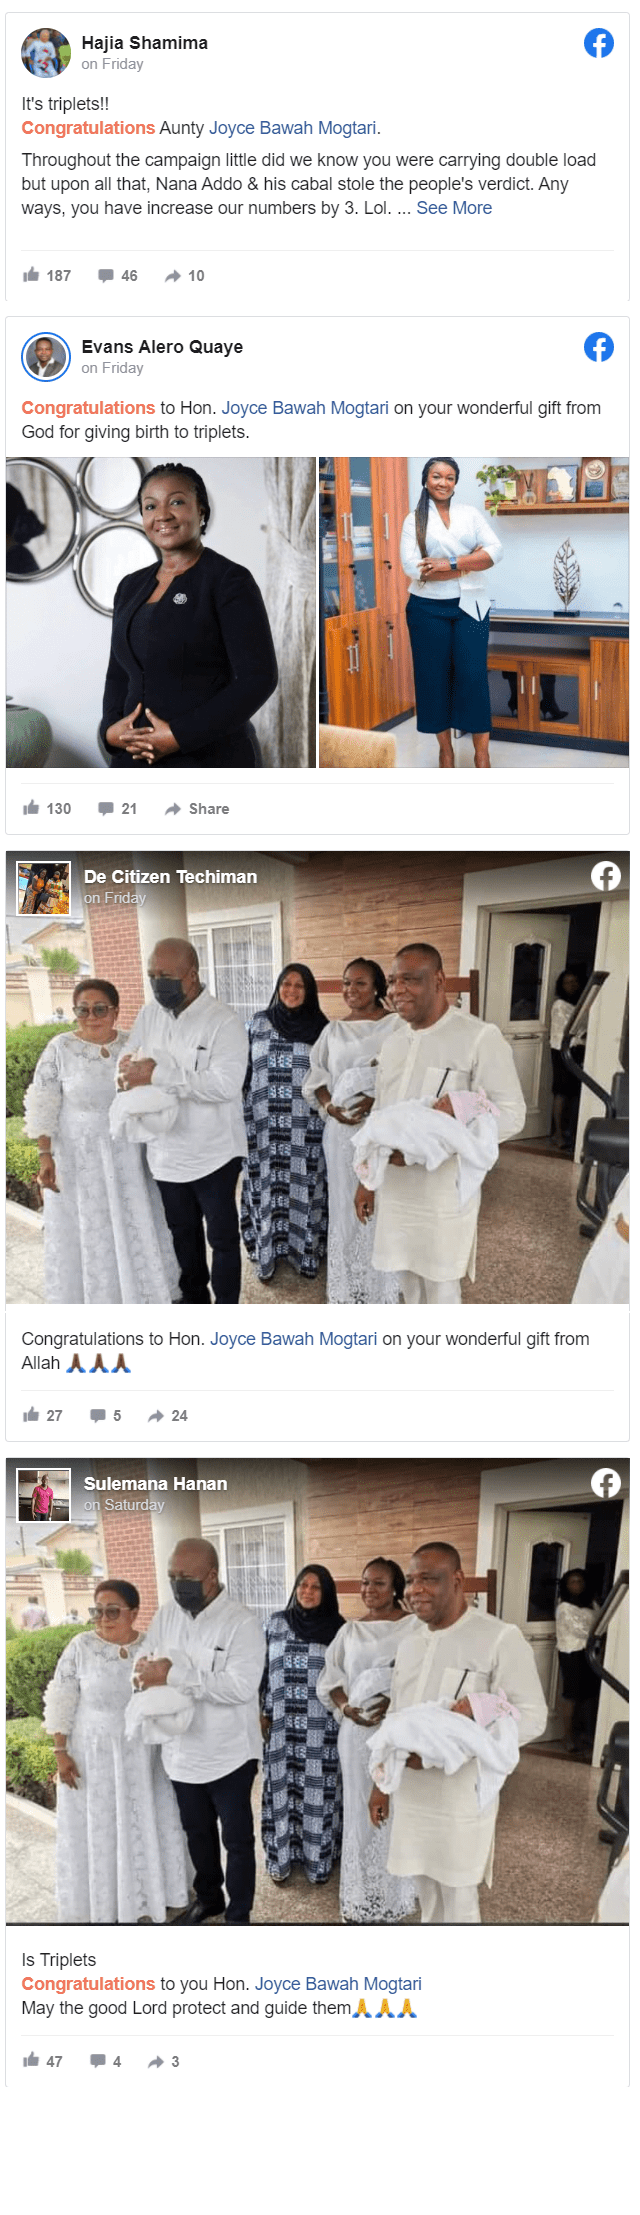 Special aide to ex-president Mahama gives birth to triplets